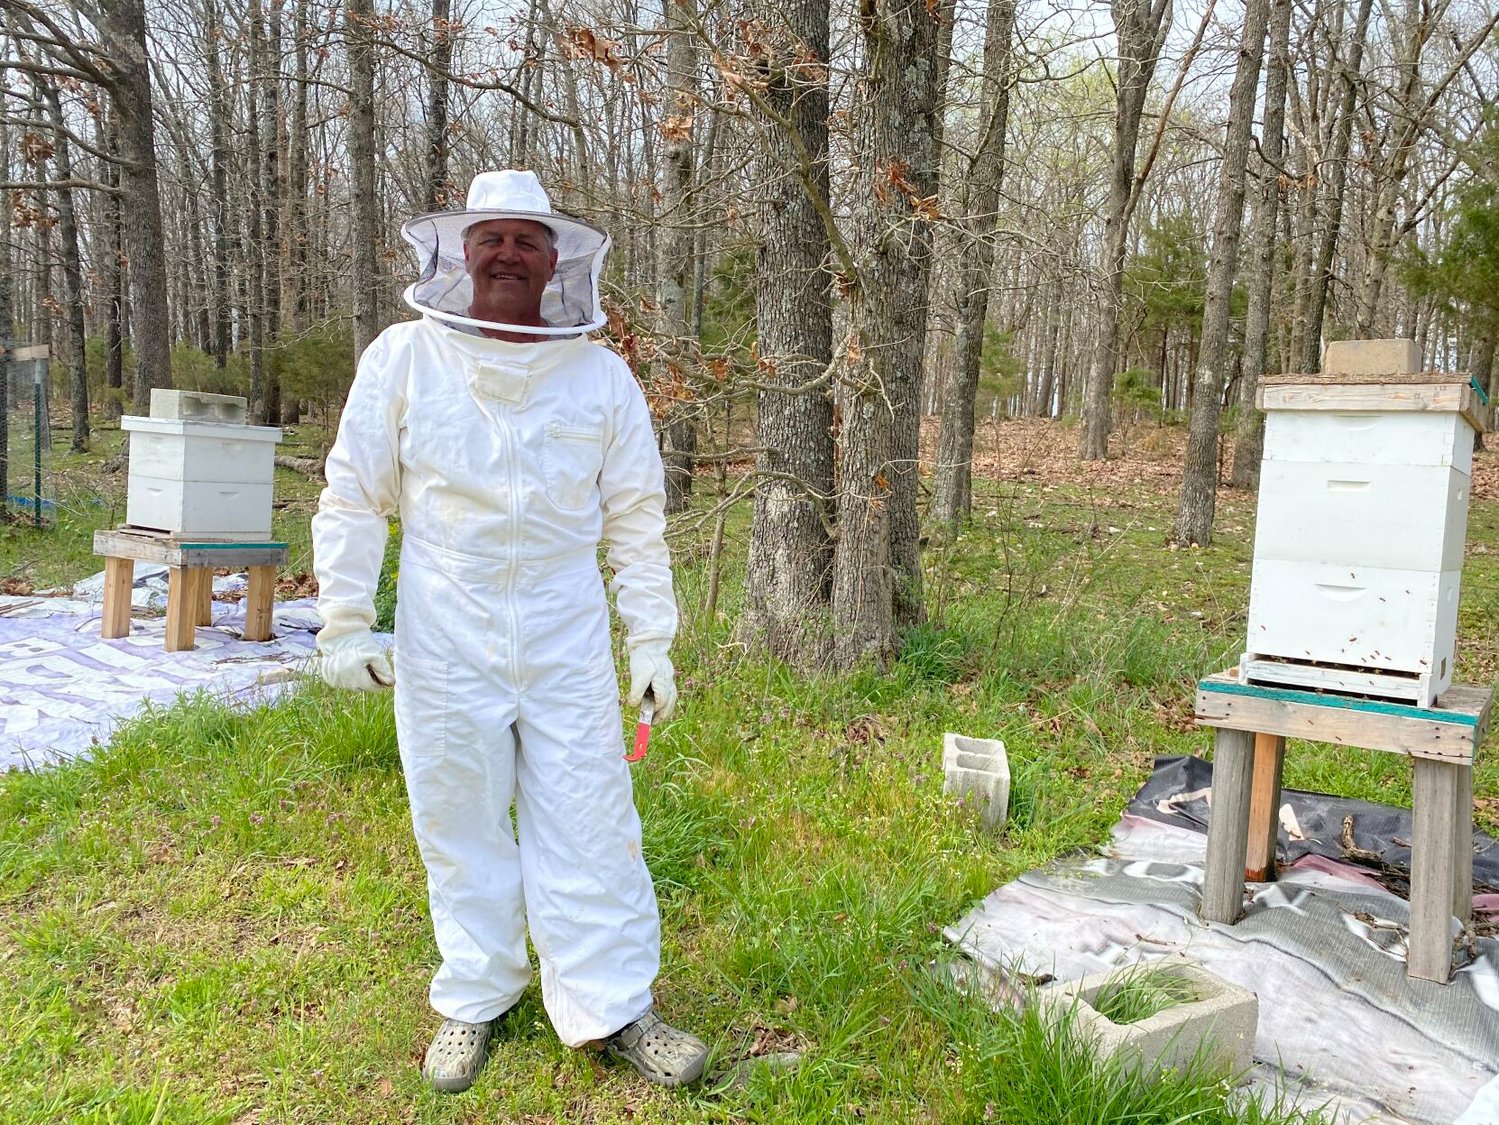 Terry Hardy pictured between his two nucs in his backyard located in Marshfield, Mo.